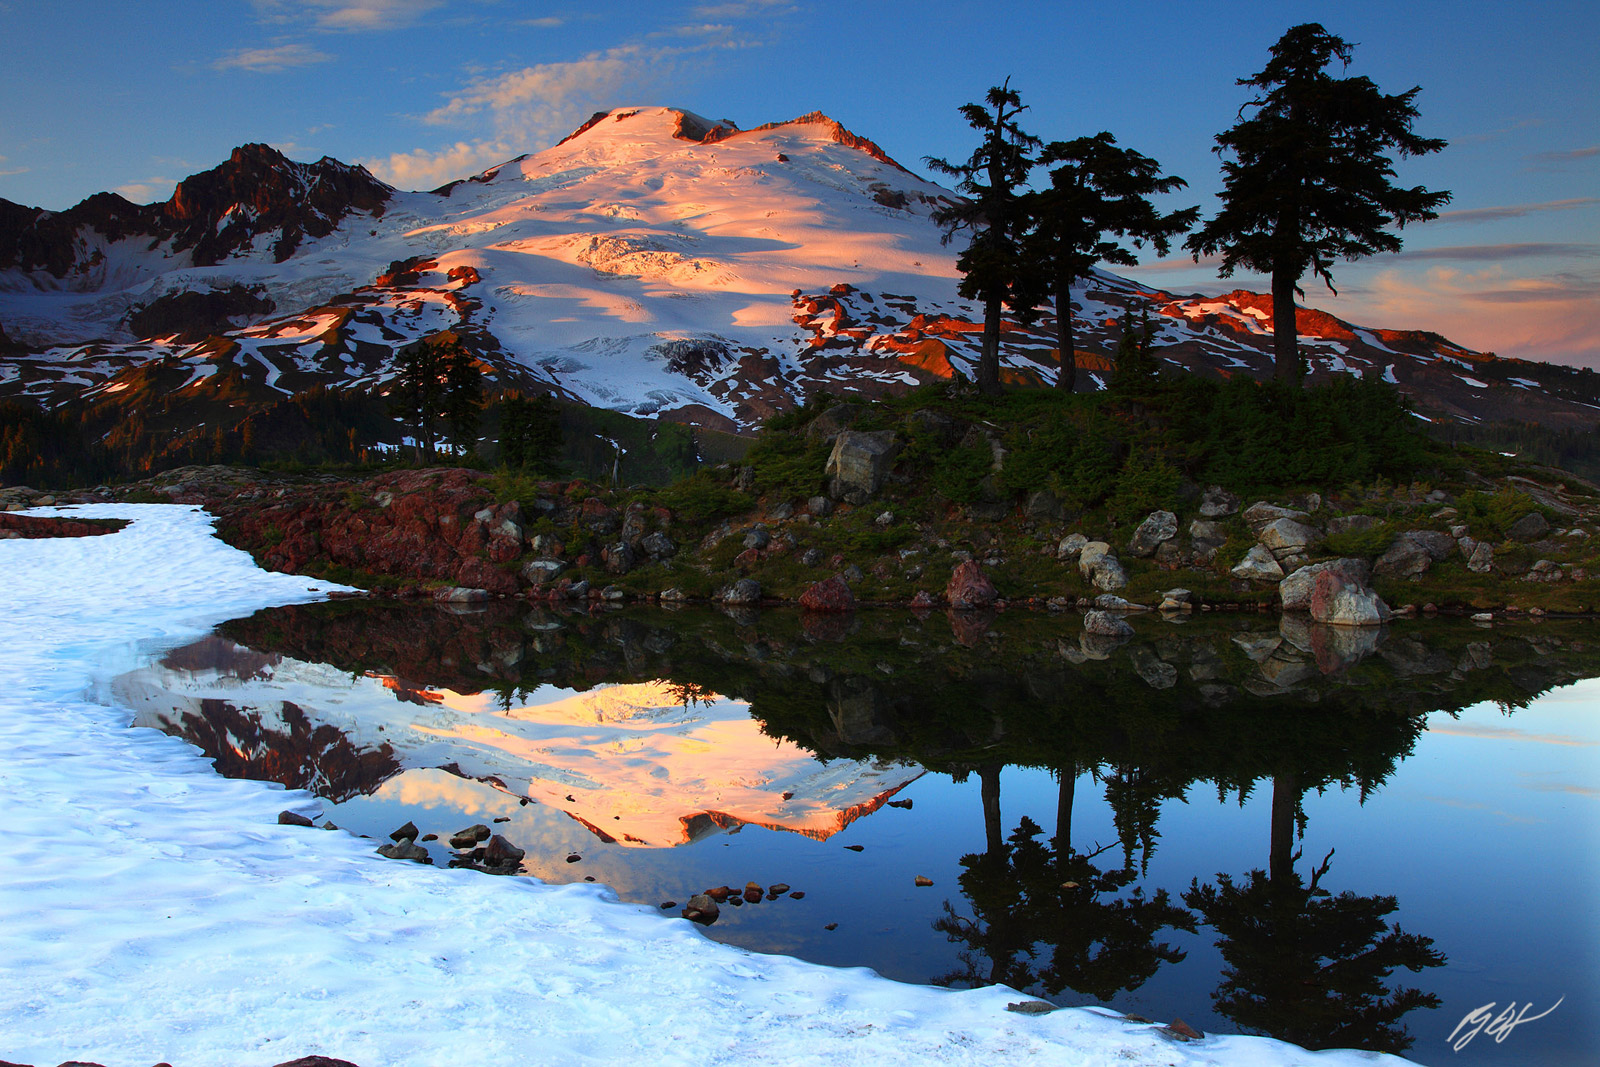 Snow and Mt Baker from Park Butte in the Mt Baker National Recreation Area in Washington